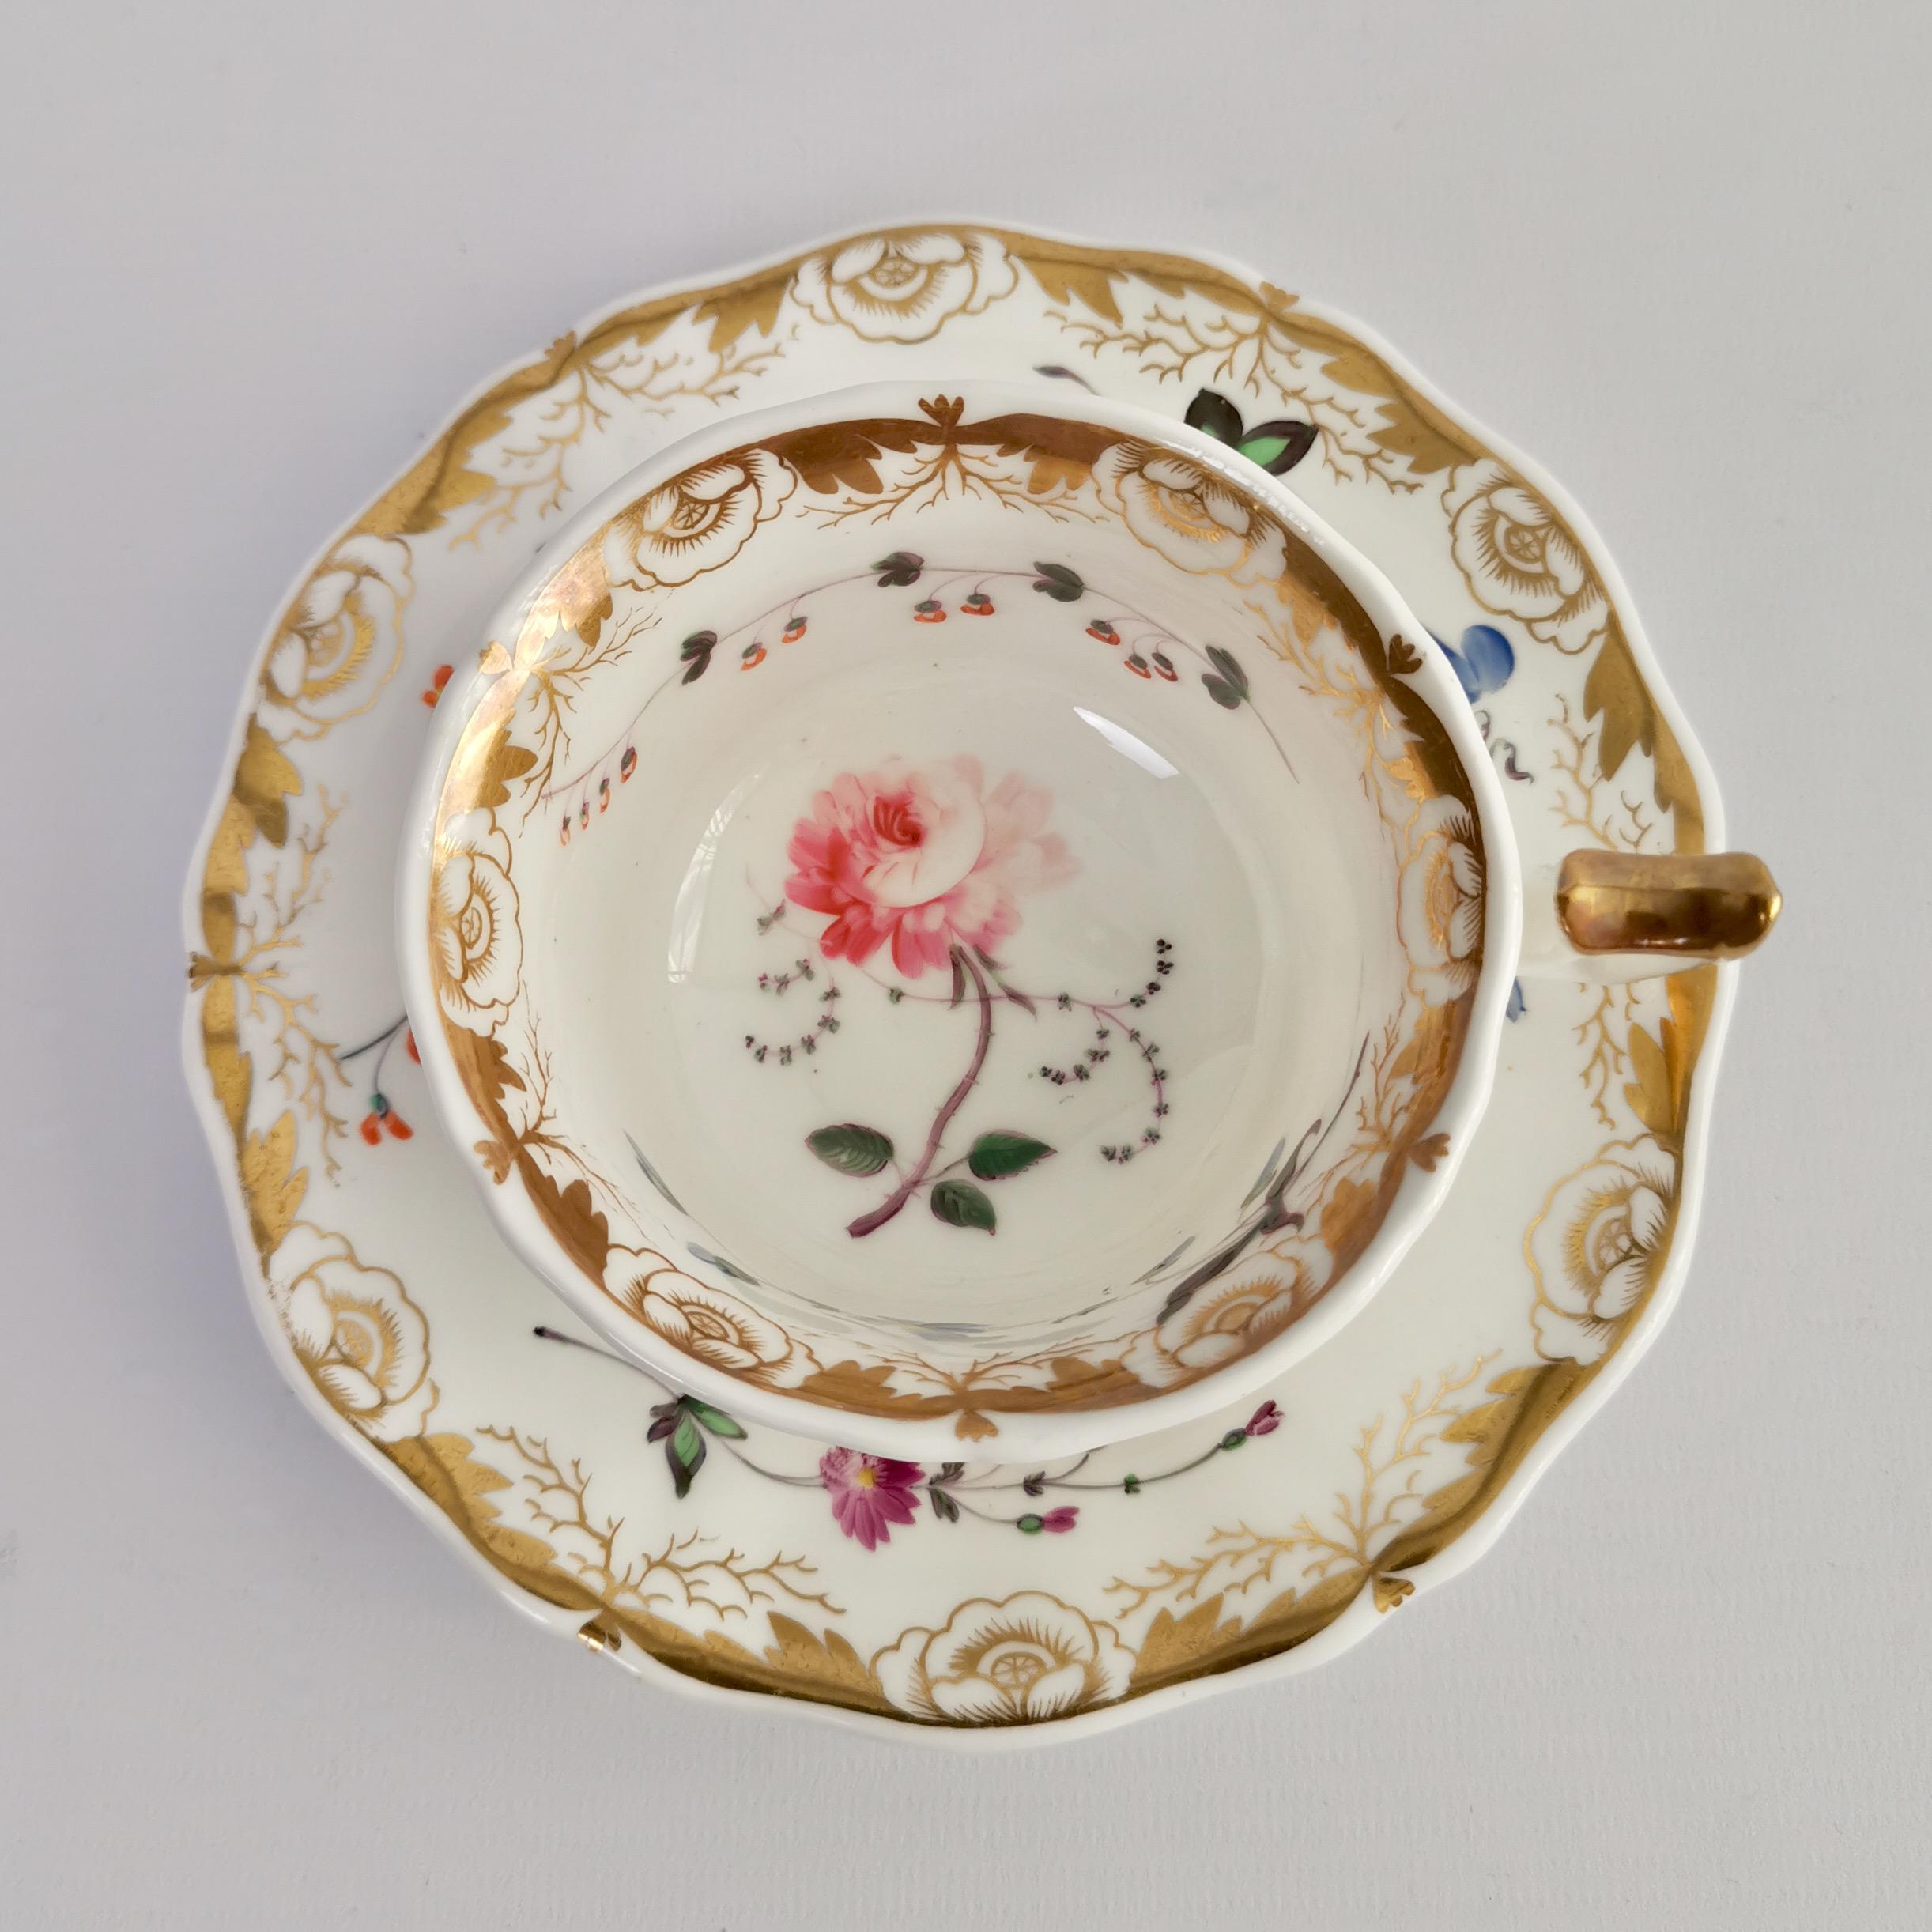 Hand-Painted Staffordshire Porcelain Teacup Trio, White with Flowers, Regency, 1825-1830